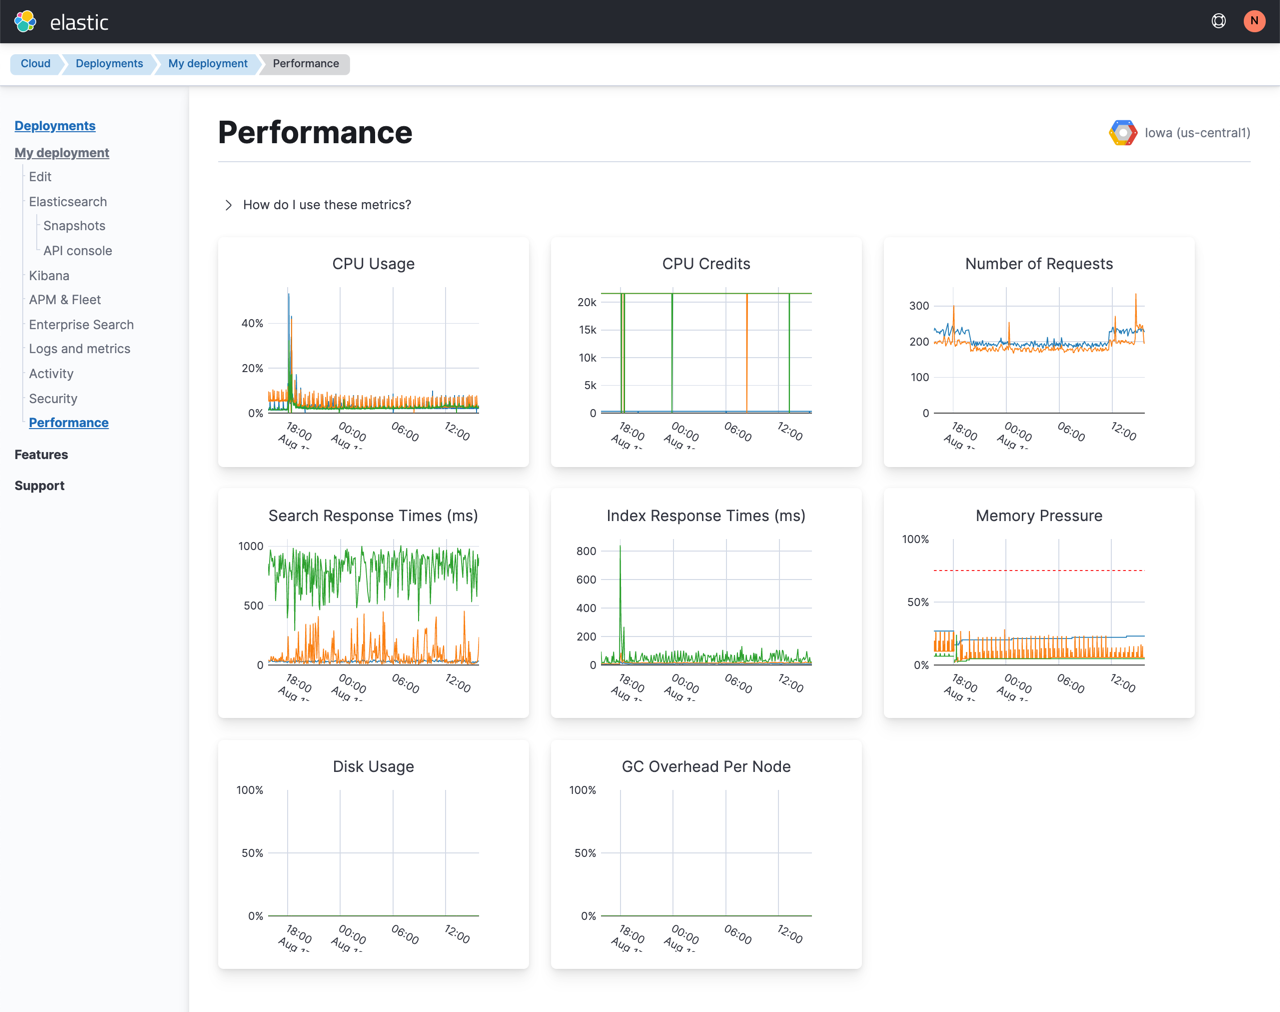 Performance page of the Elastic Cloud console